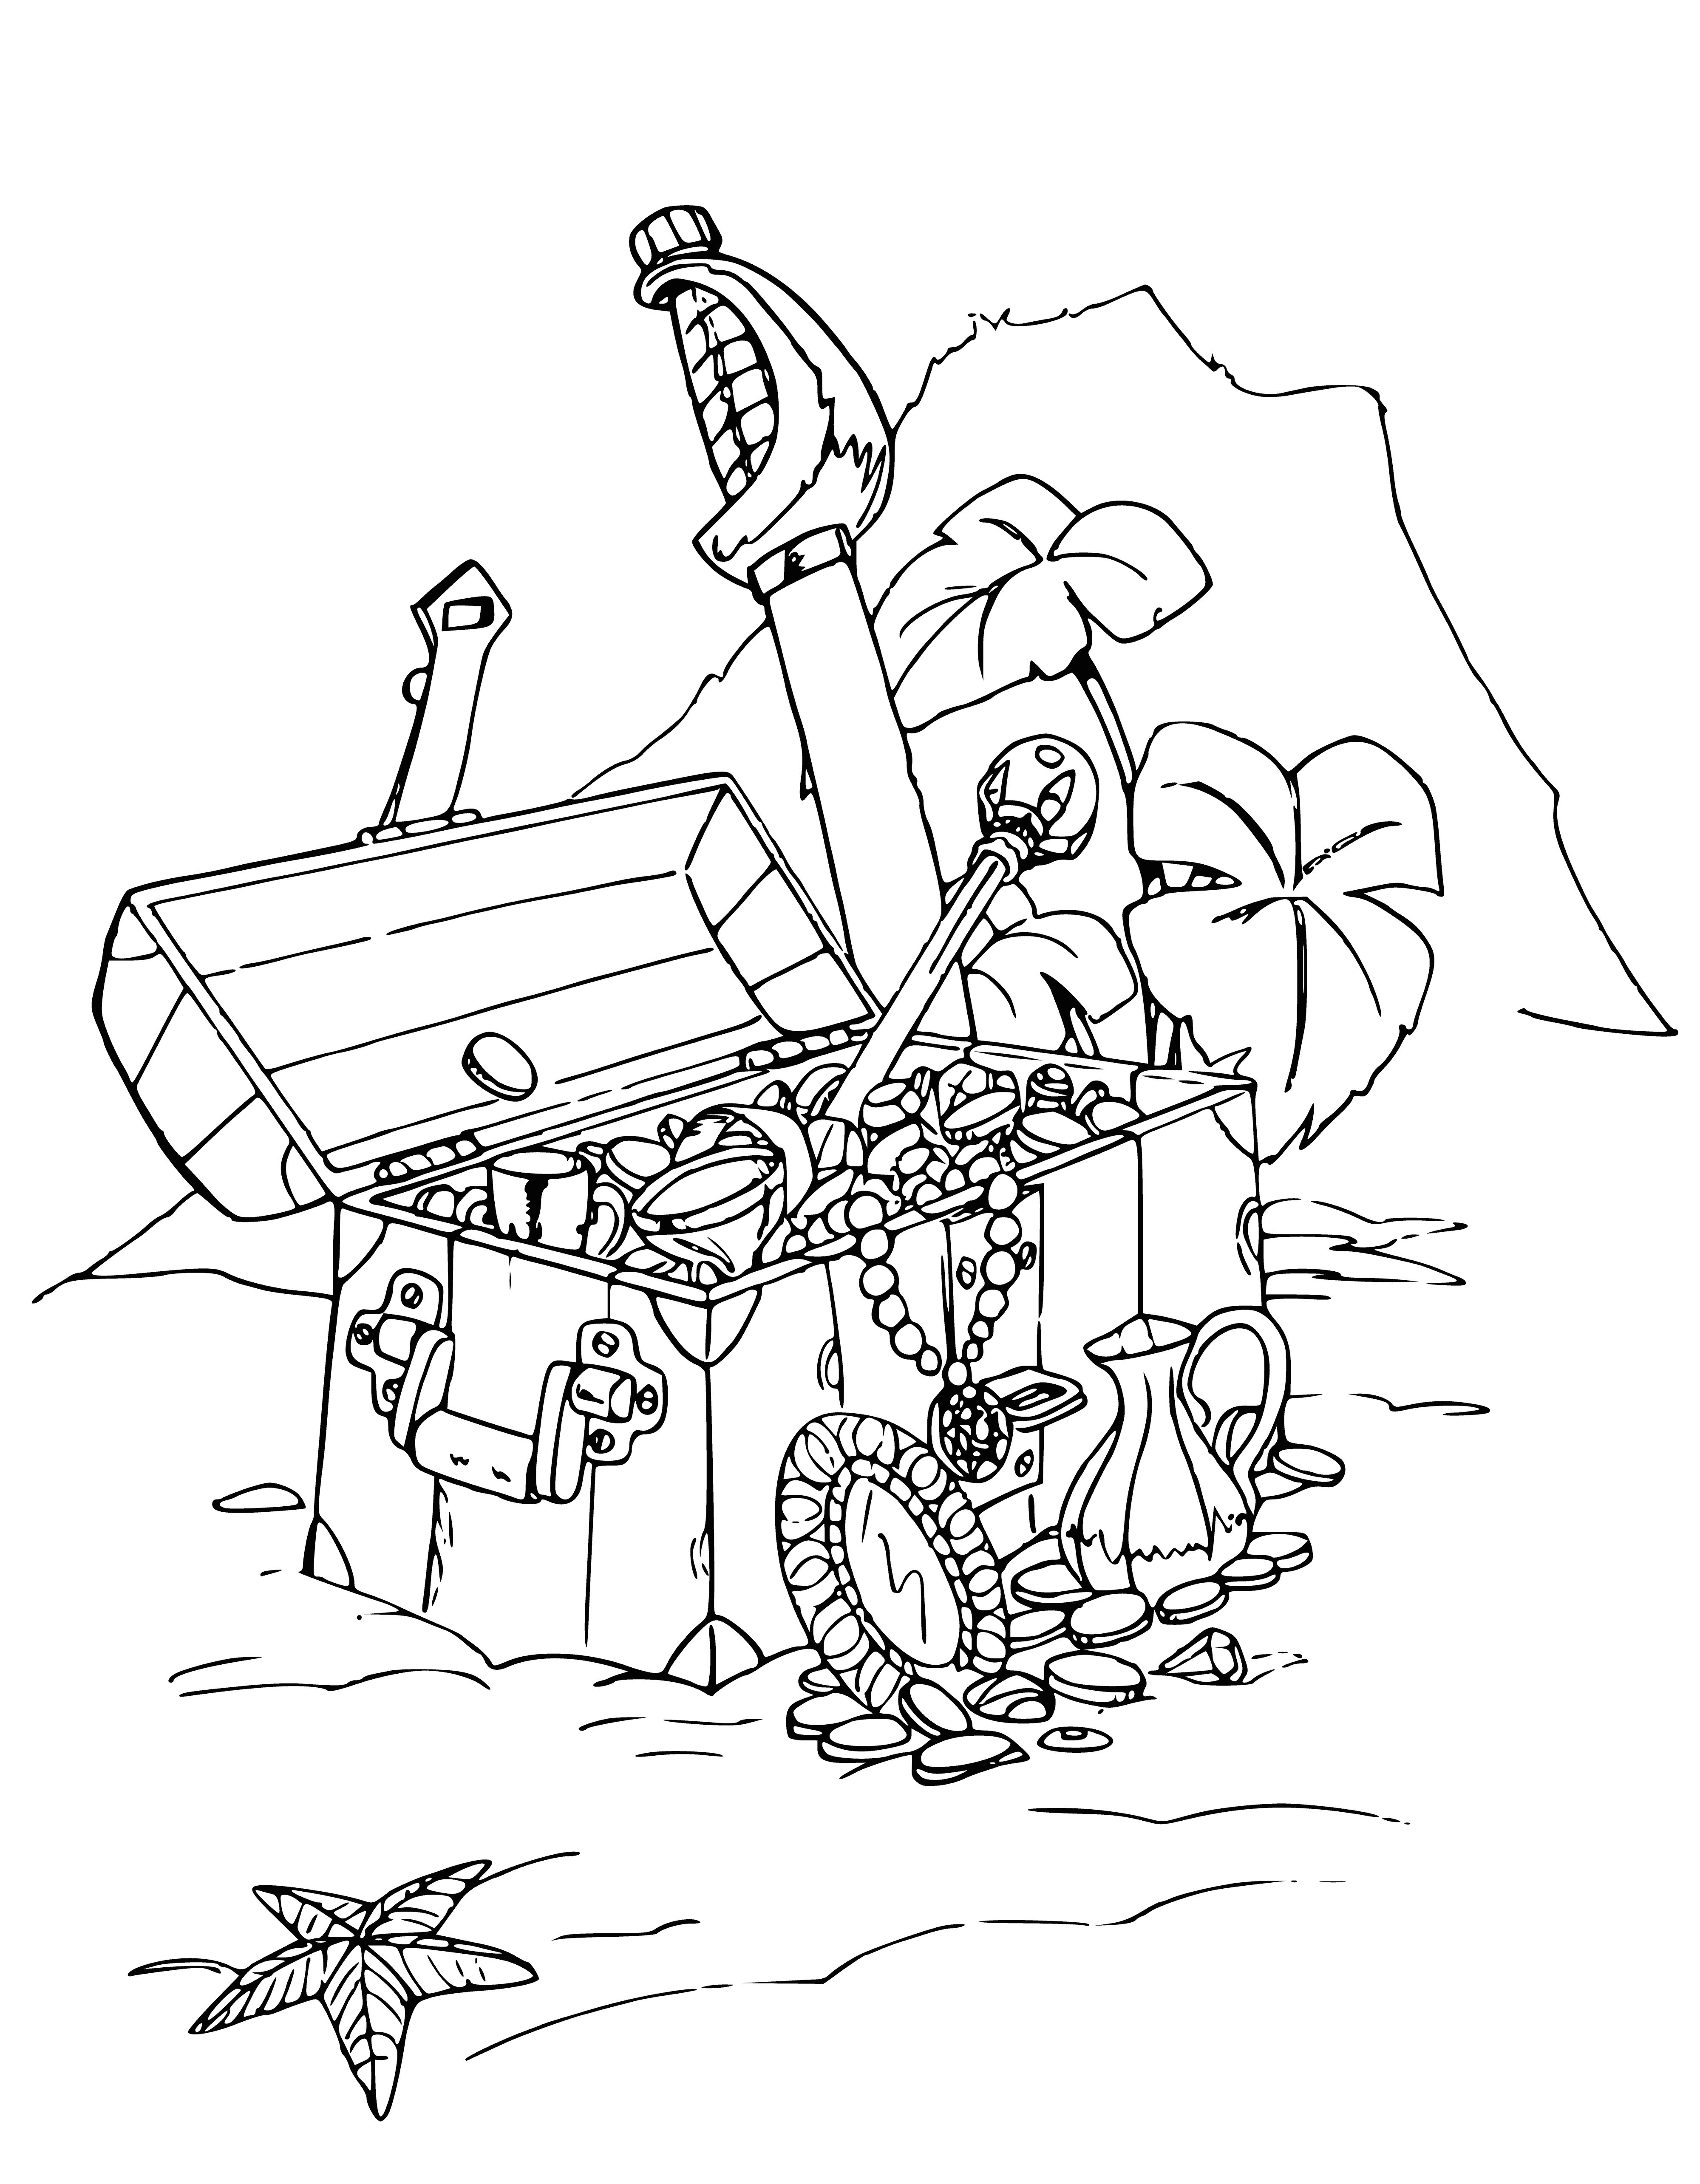 Treasure chest coloring page